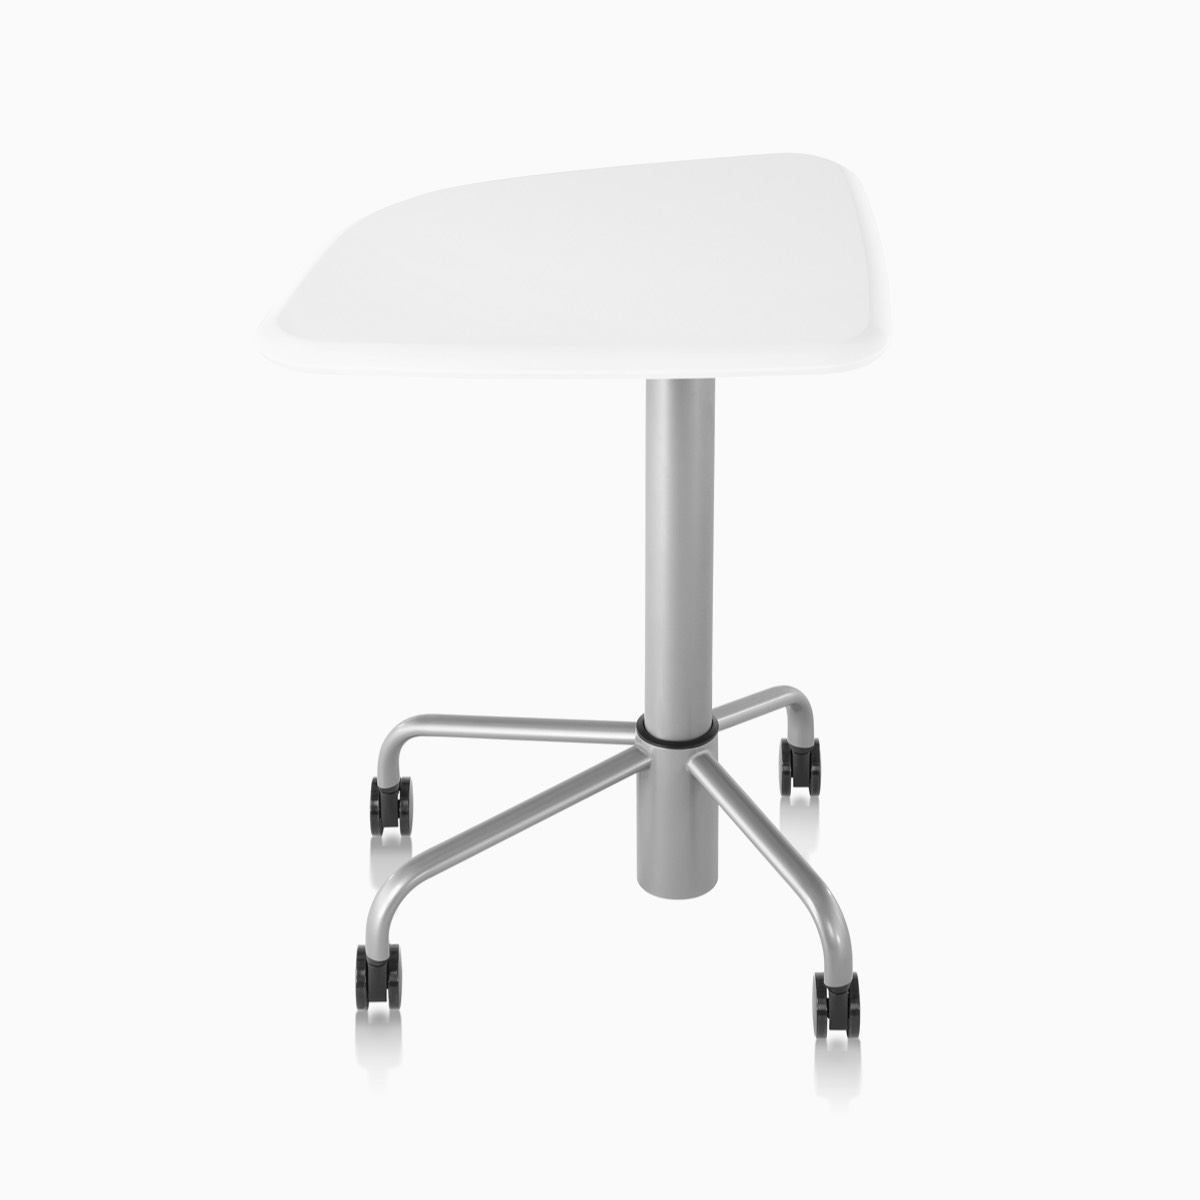 An Intent Solution mobile, height-adjustable table with a white laminate top and metallic silver base.